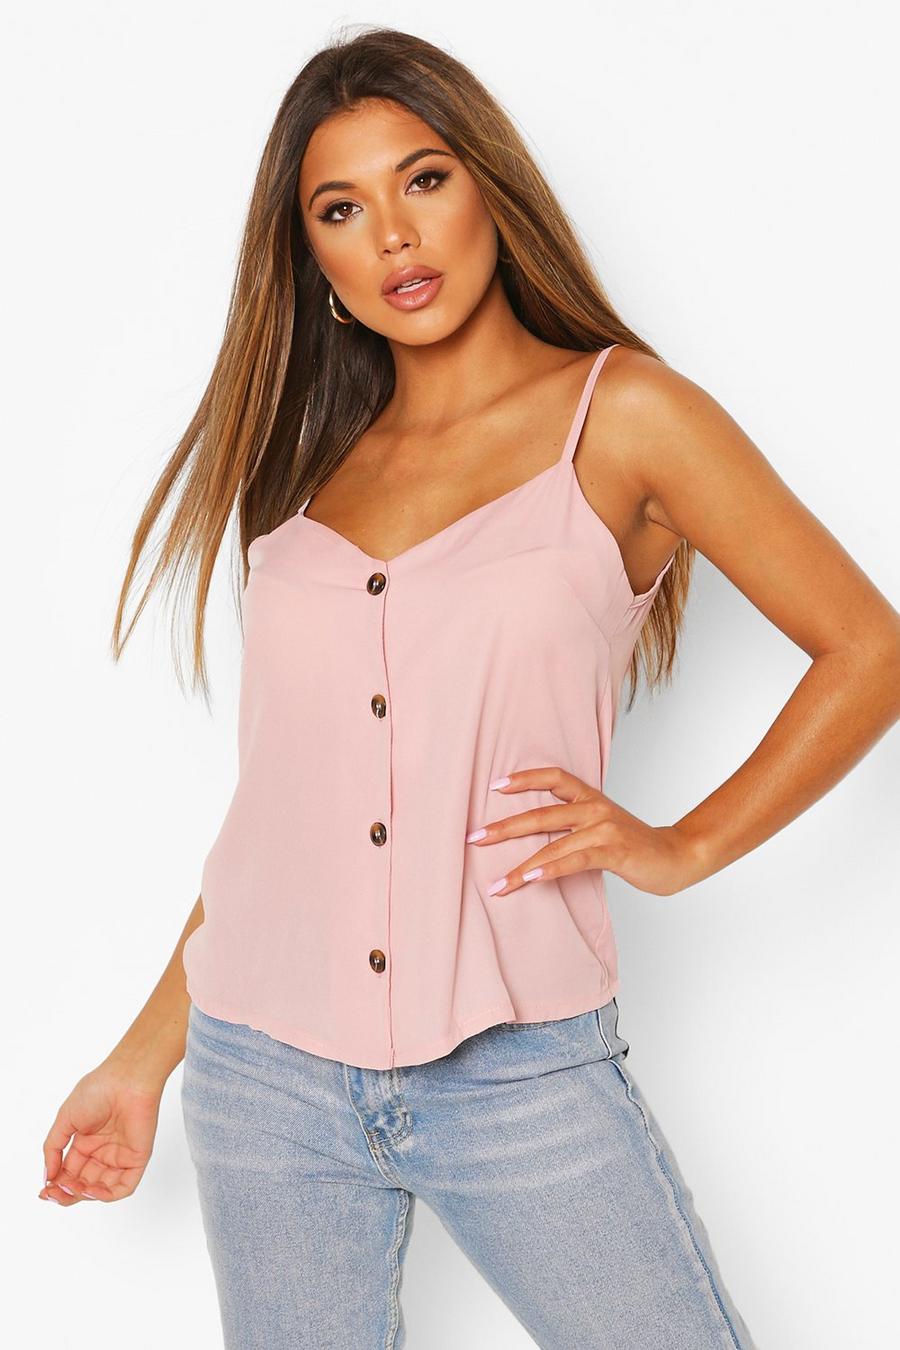 Blush rose Button Front Woven Cami Top